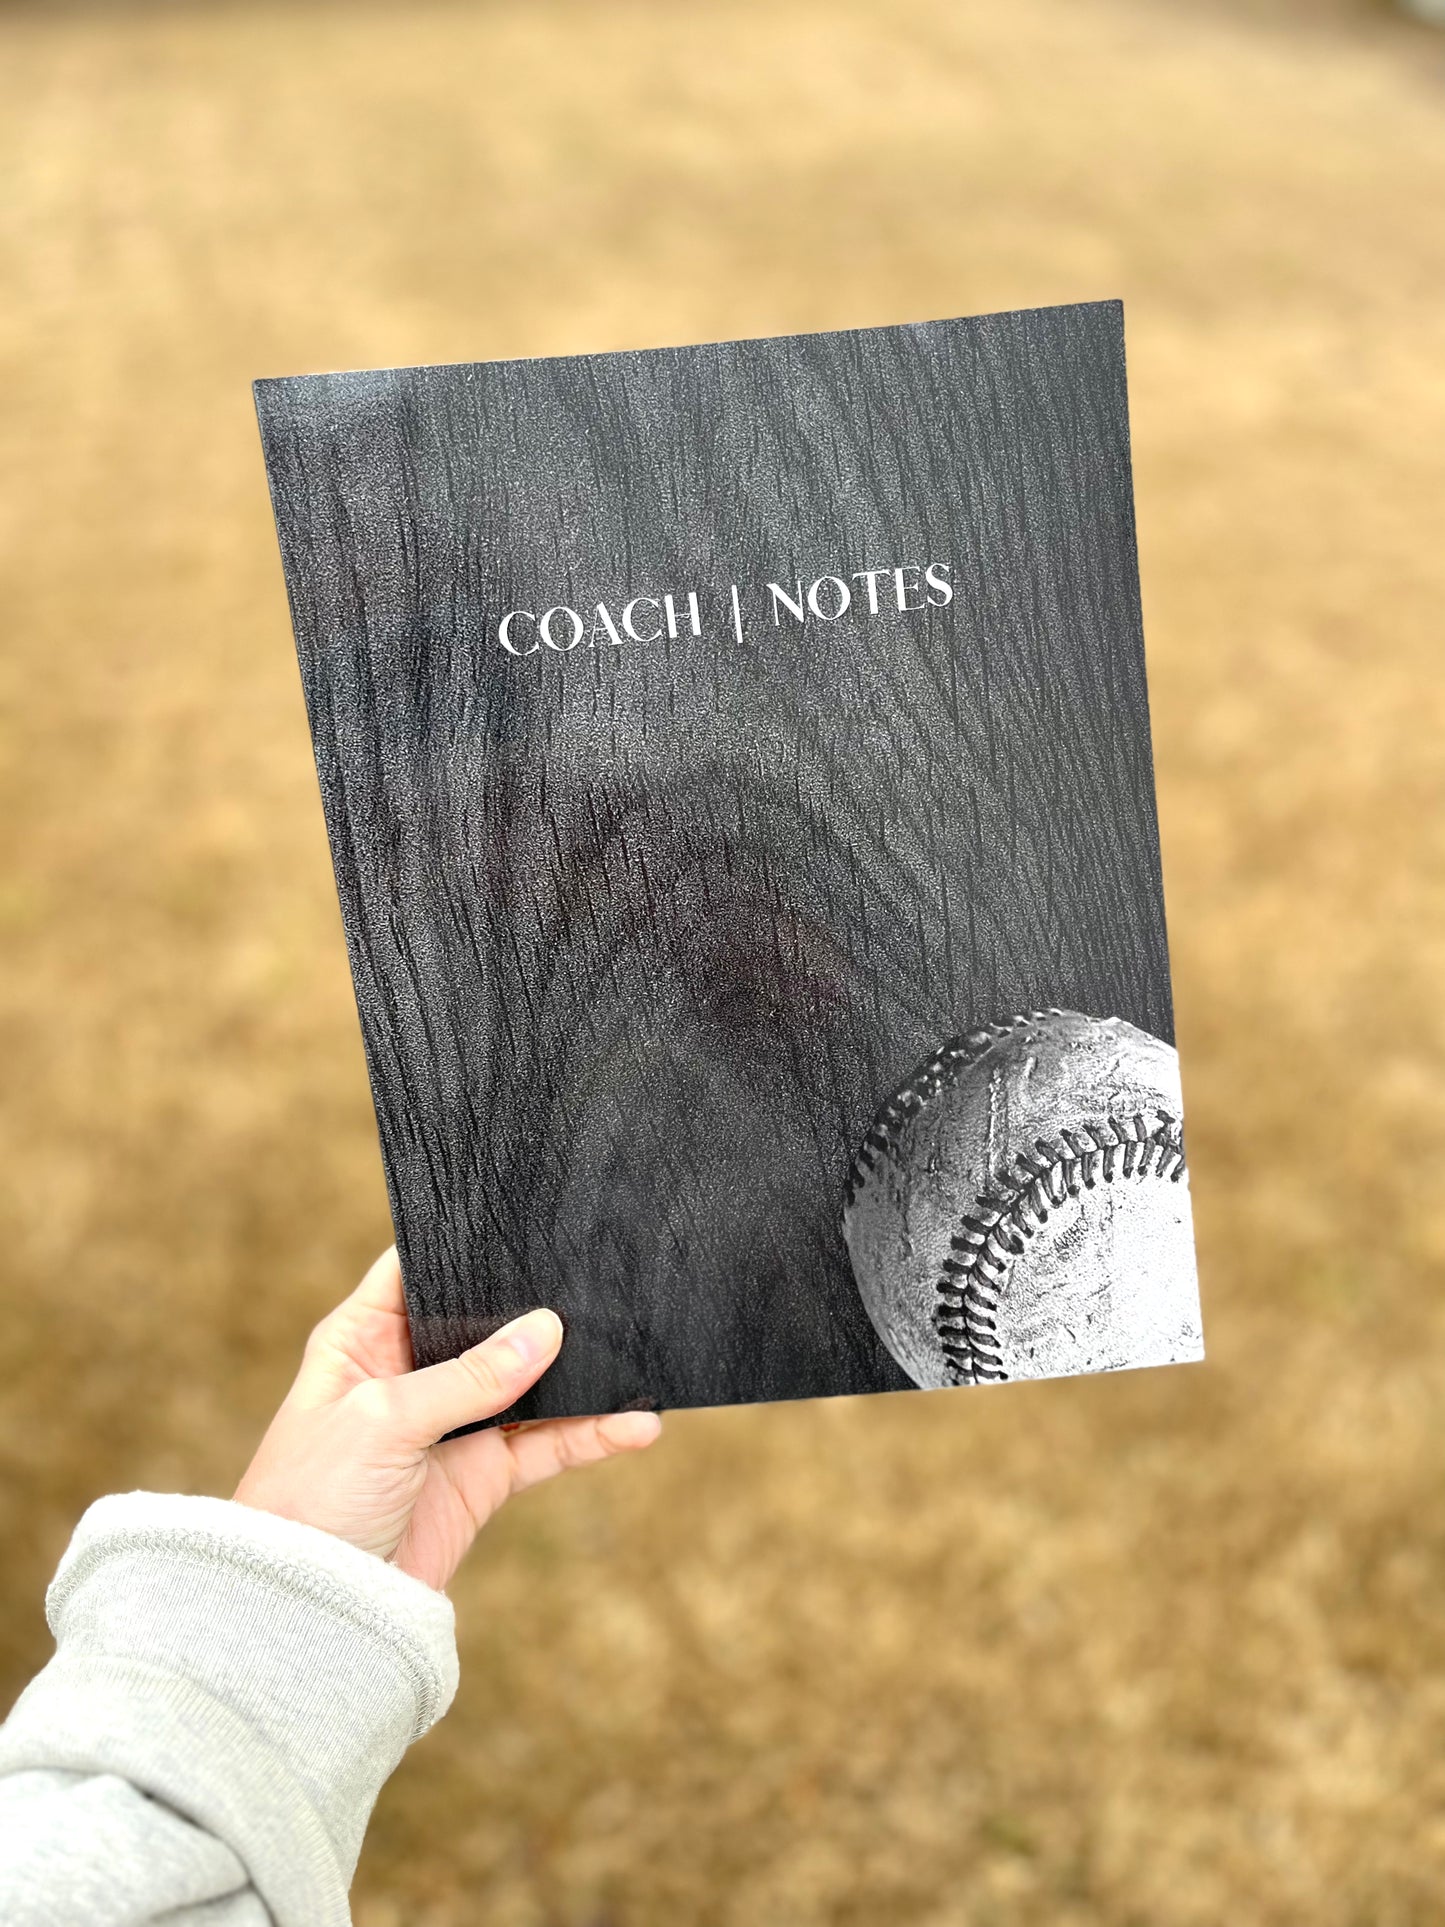 Baseball Coach Notebook: 125 Page Playbook with Baseball Field Diagrams and Note-Taking Sections